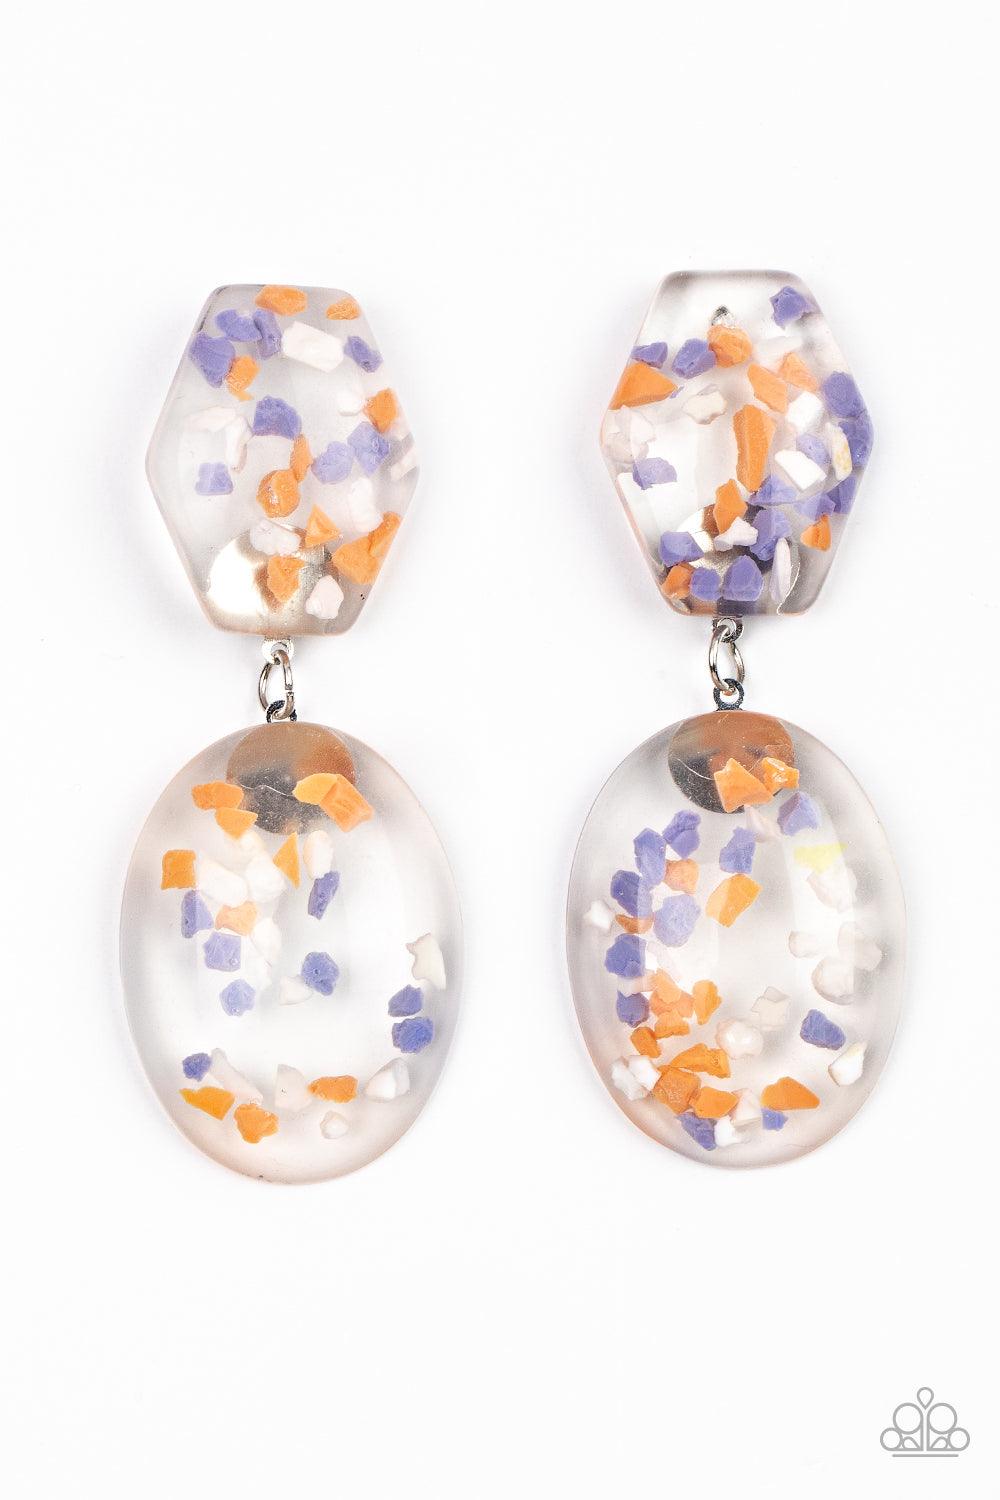 Paparazzi Accessories Flaky Fashion - Orange Featuring multicolored confetti-like flakes, a clear acrylic oval frame swings from the bottom of a matching hexagonal frame, creating a bubbly lure. Earring attaches to a standard post fitting. Sold as one pai